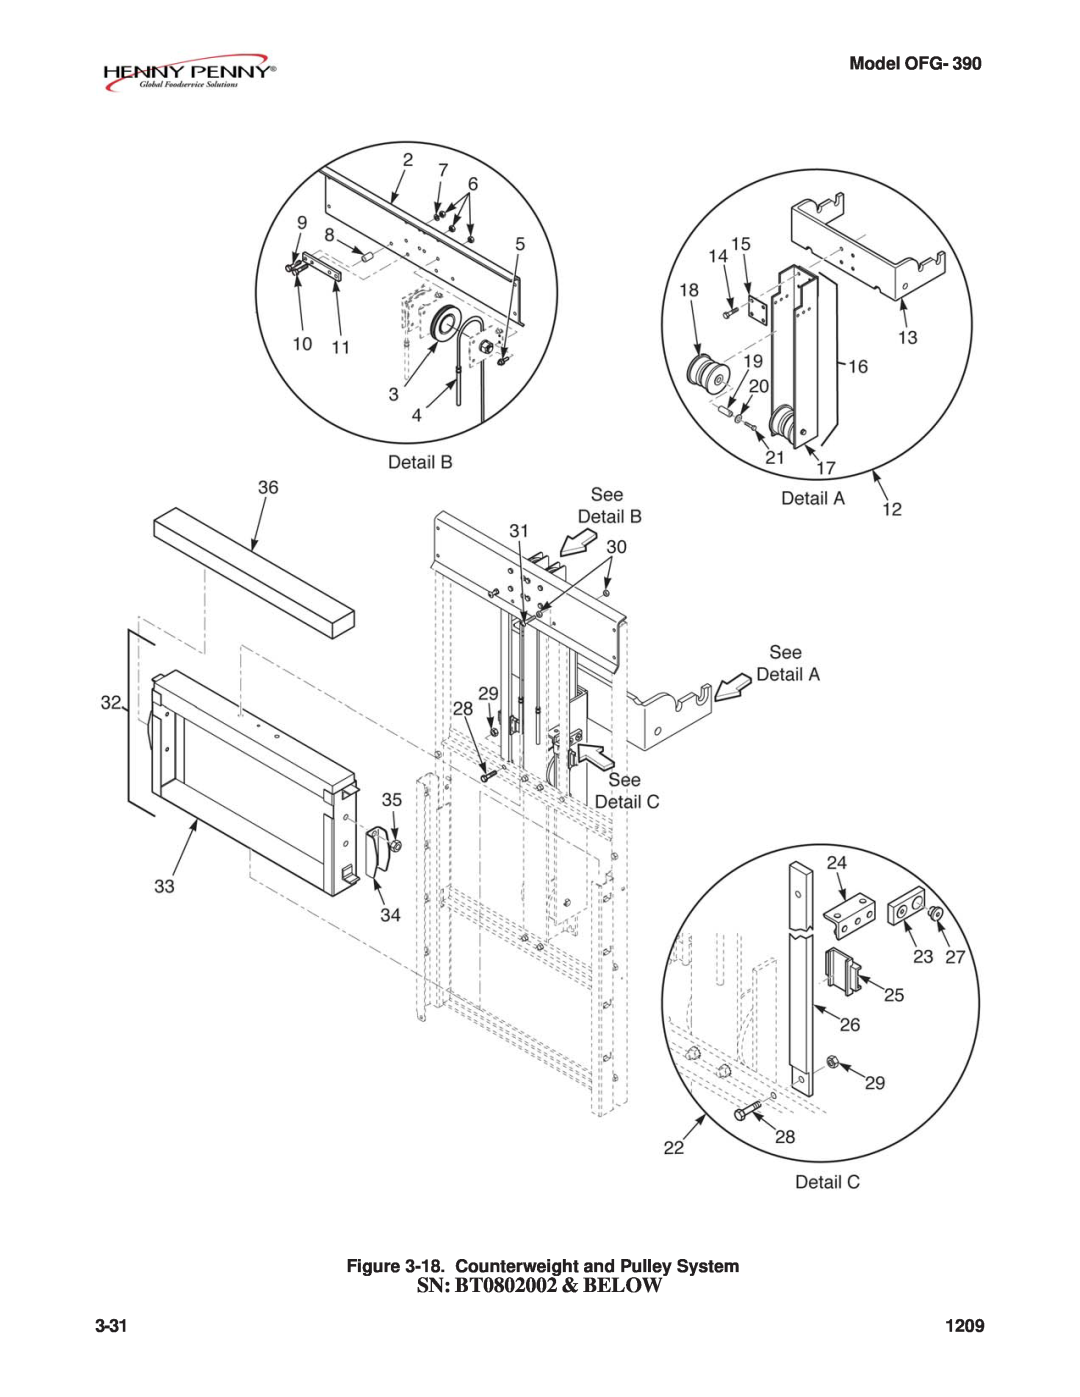 Henny Penny OFG-392 technical manual SN: BT0802002 & BELOW, Model OFG, 18.Counterweight and Pulley System, 3-31, 1209 